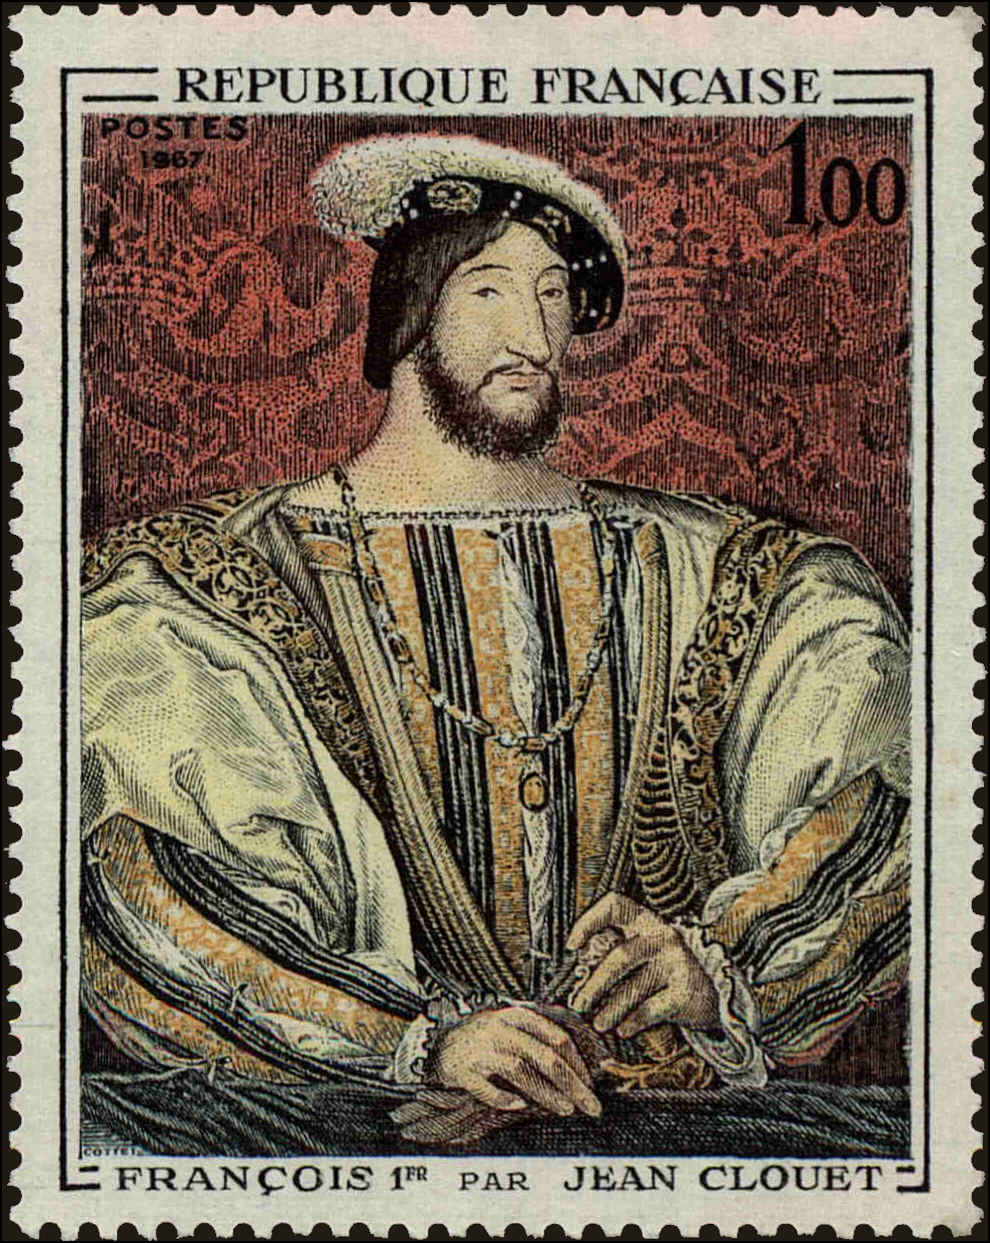 Front view of France 1173 collectors stamp